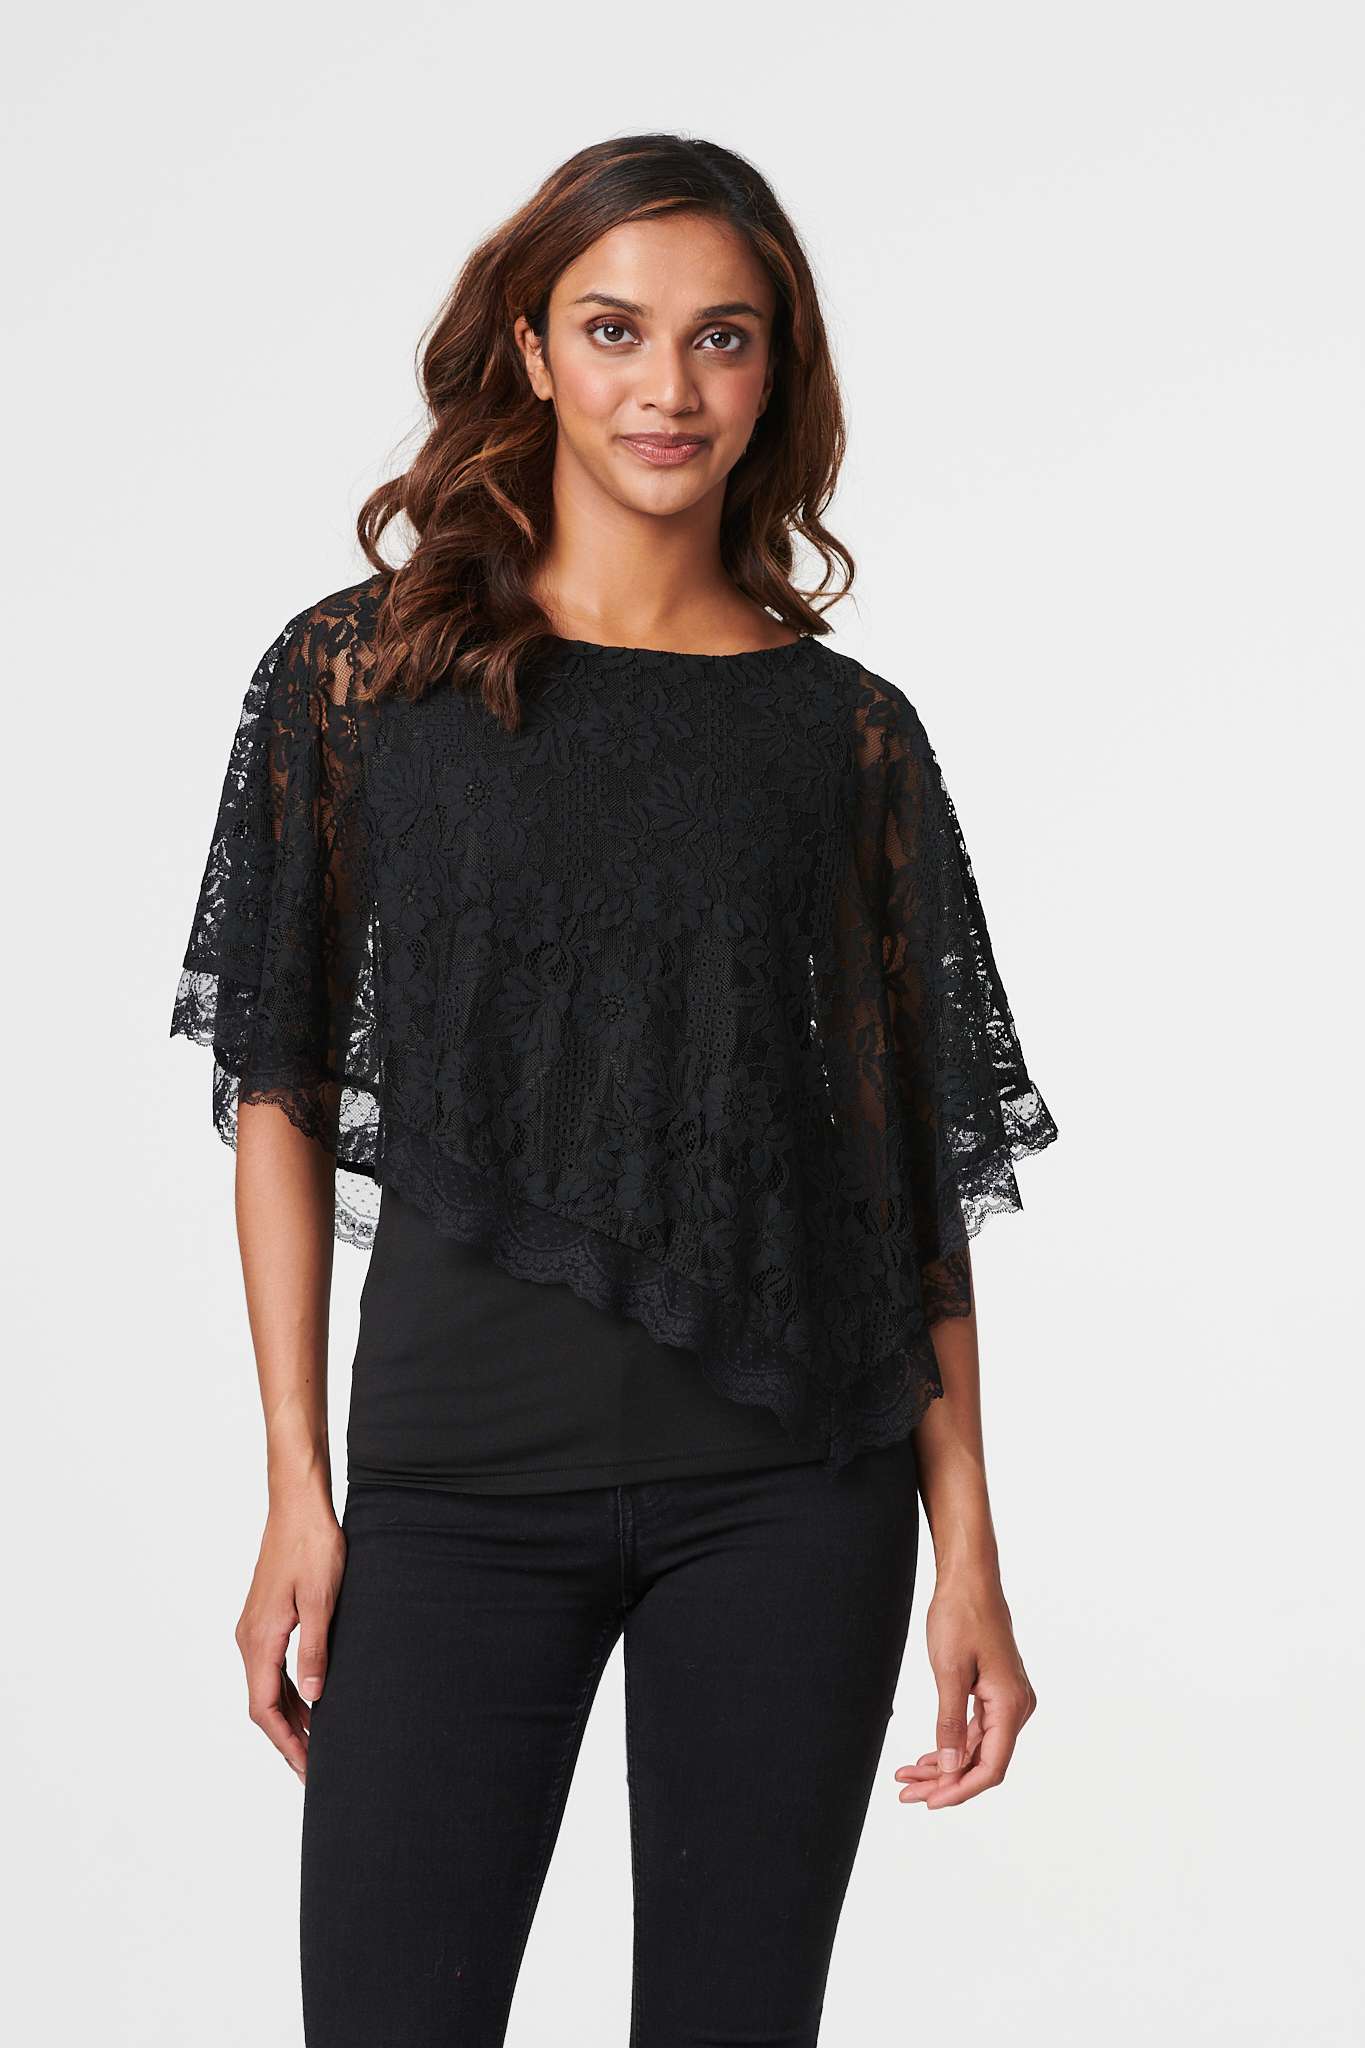 Black | Lace Overlay 1/2 Sleeve Top